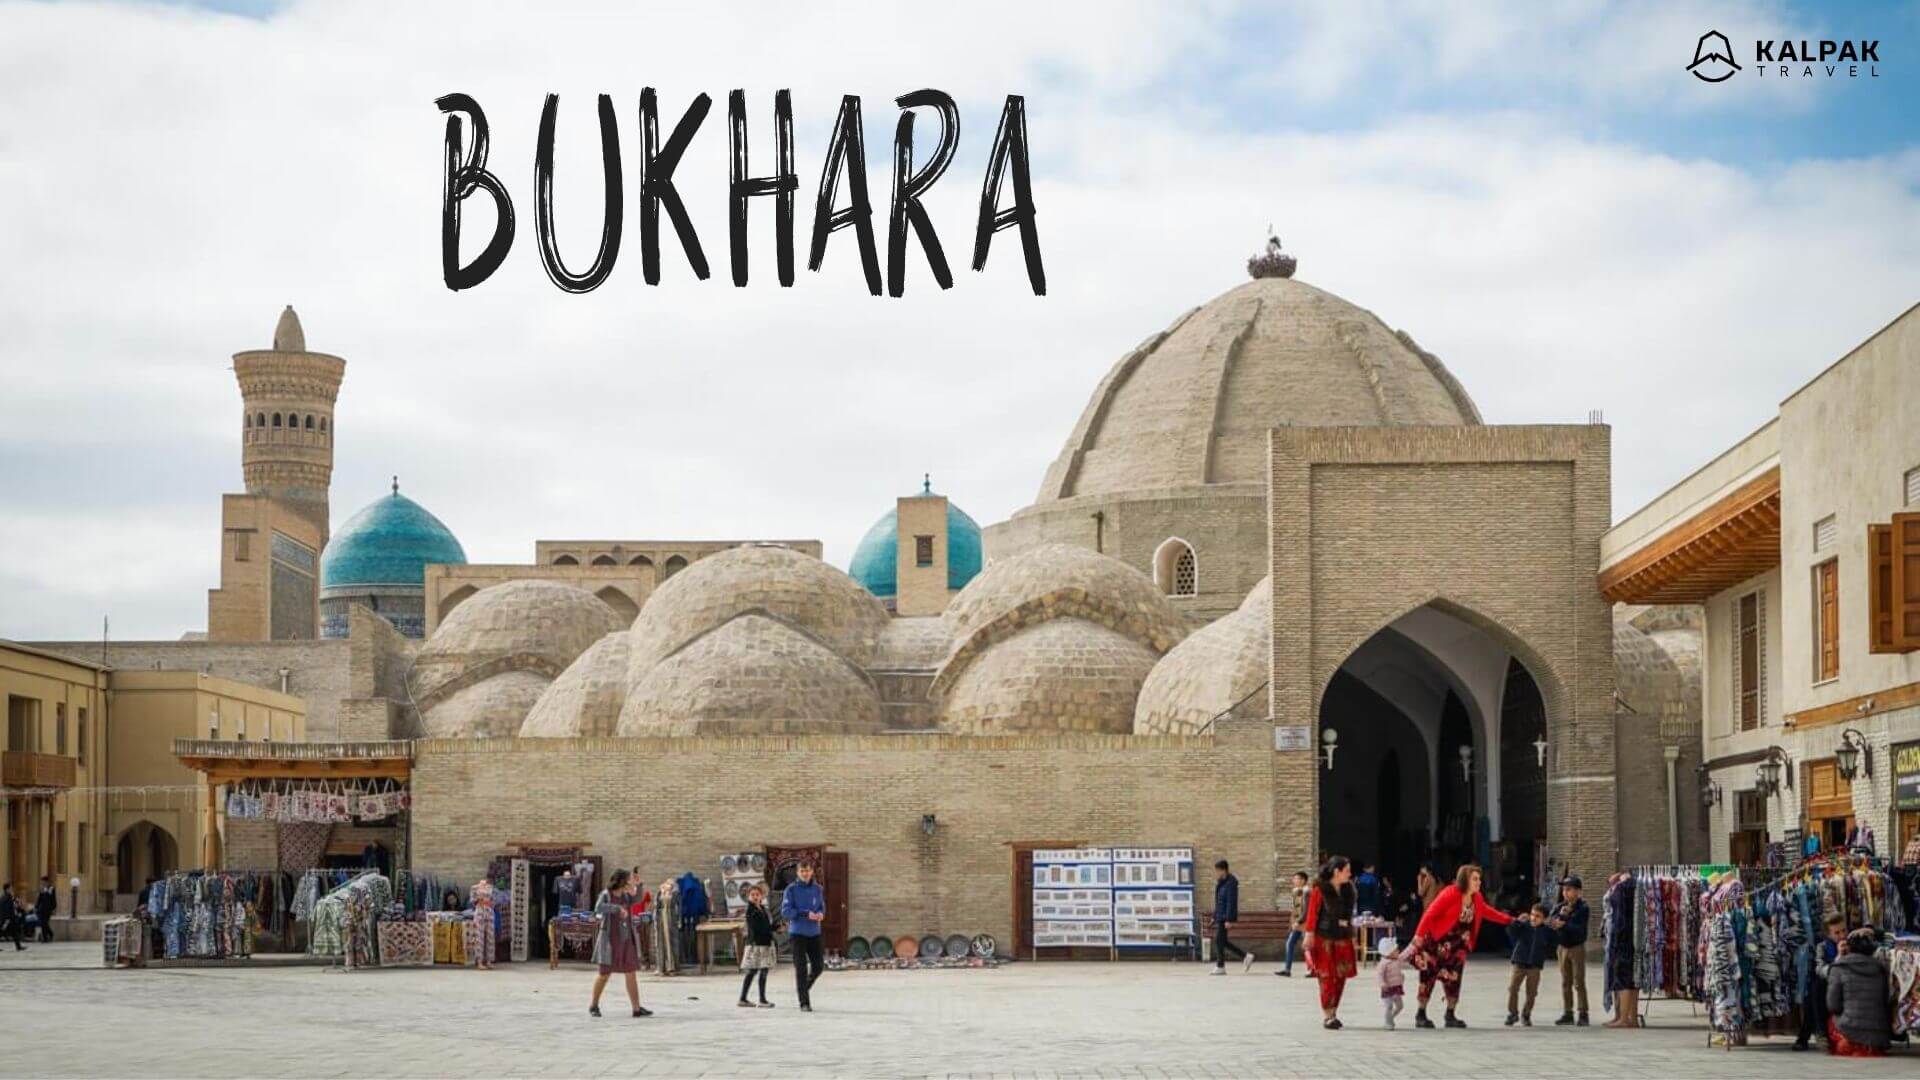 Bukhara domes with covered market in Uzbekistan